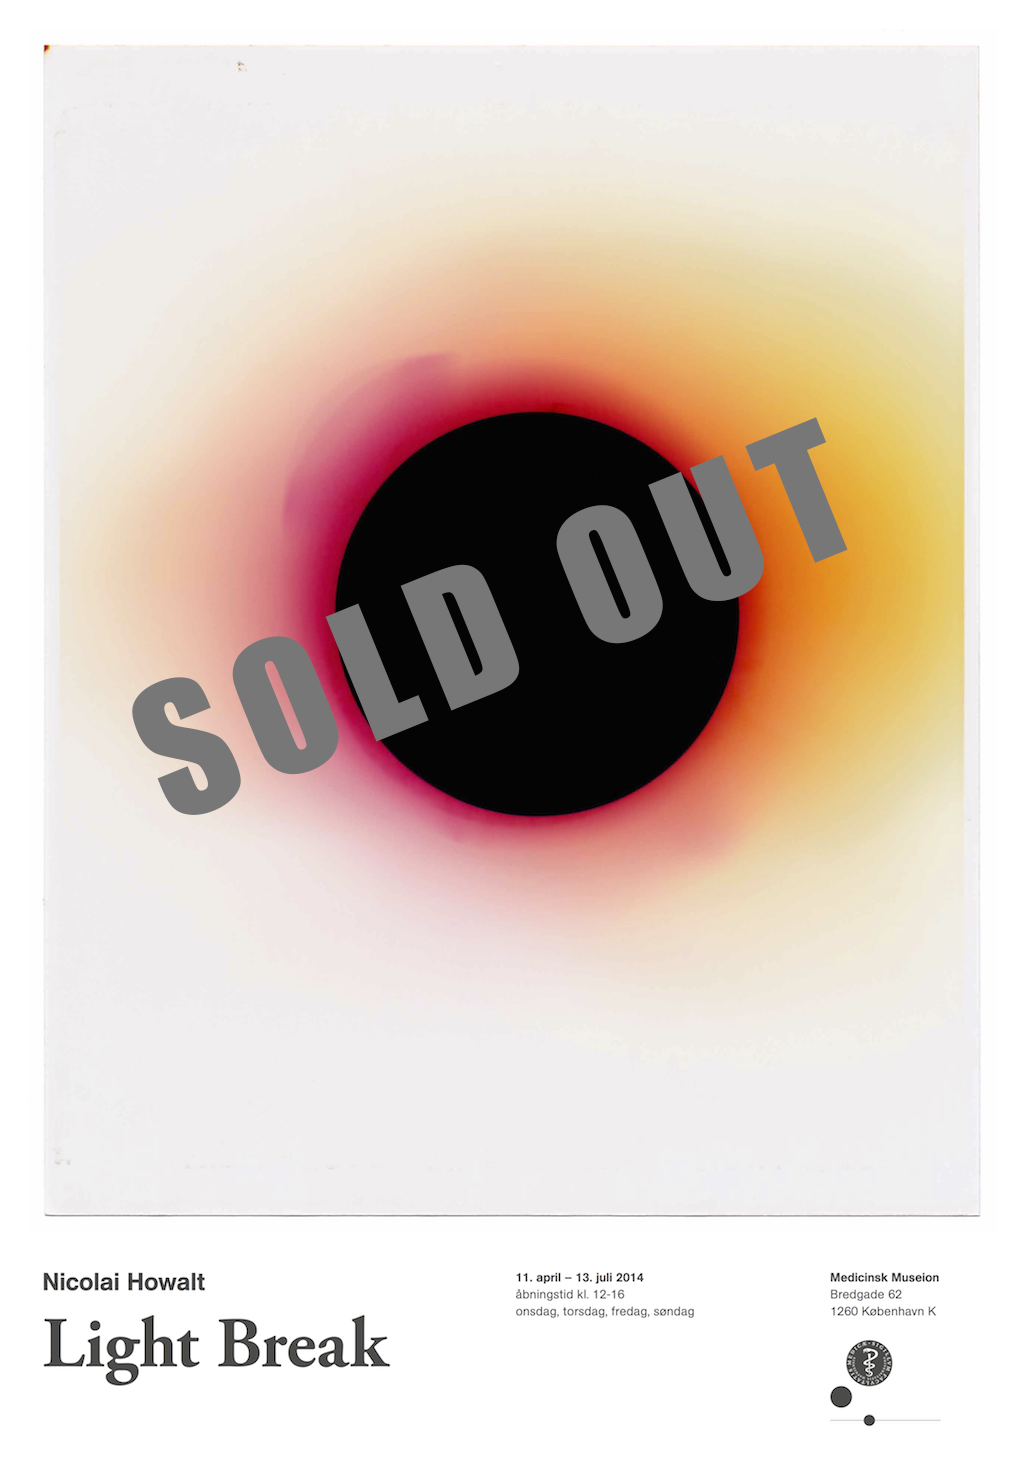 Light Break poster (sold out) | Museion Shop